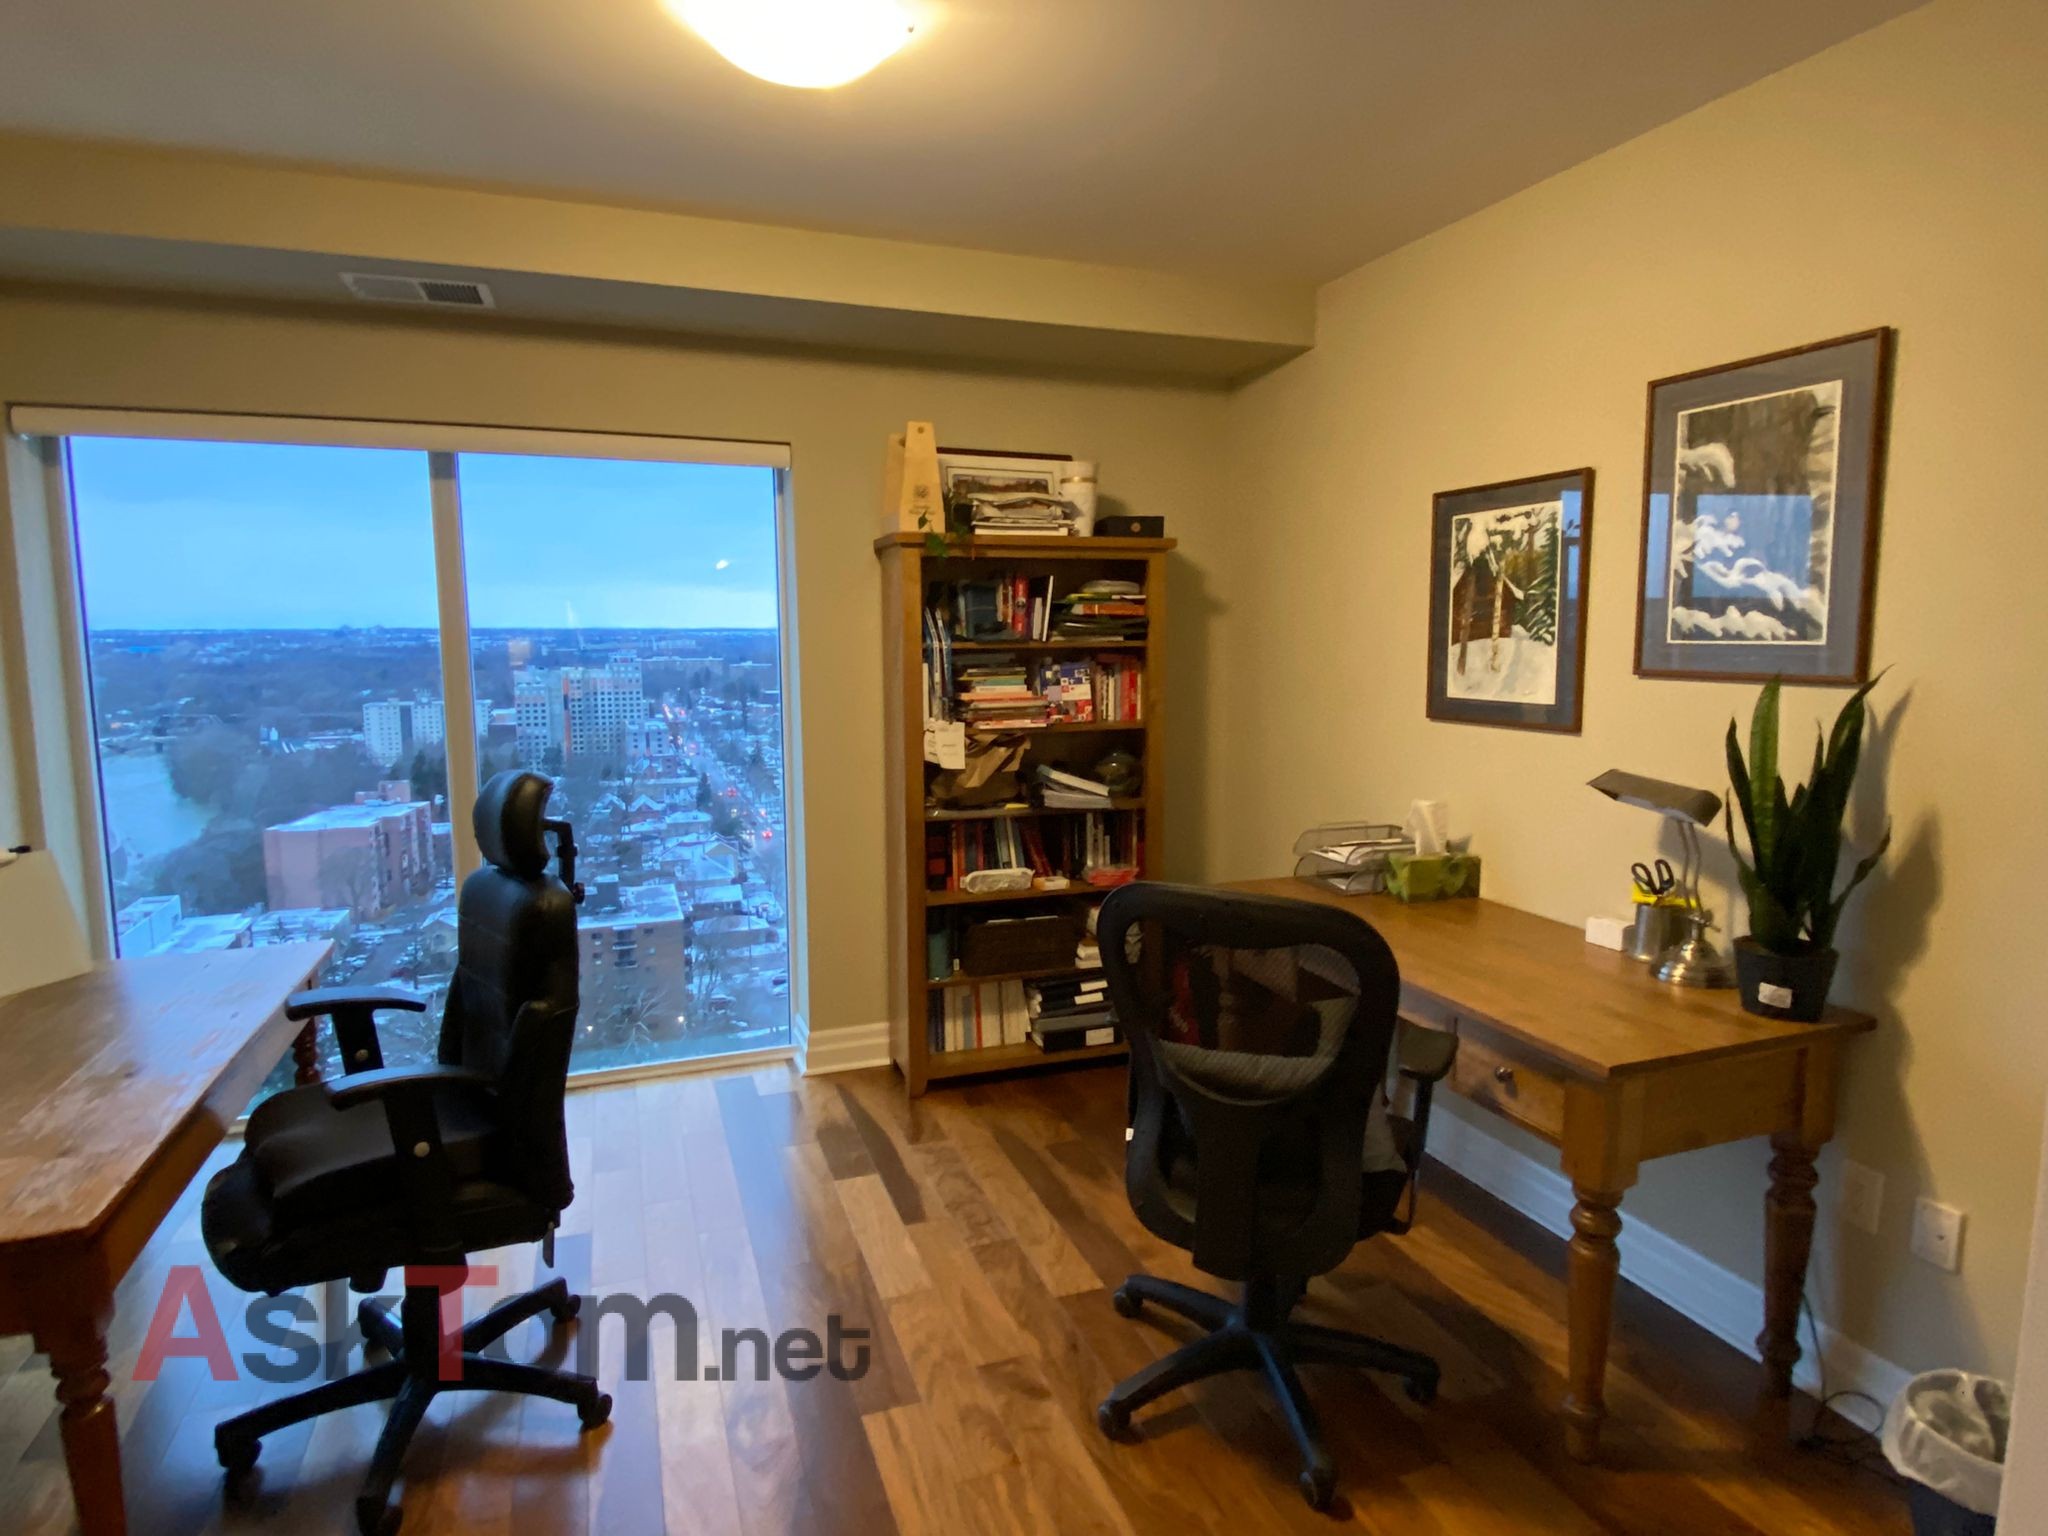 Luxury modern condominium in downtown London with easy access to university